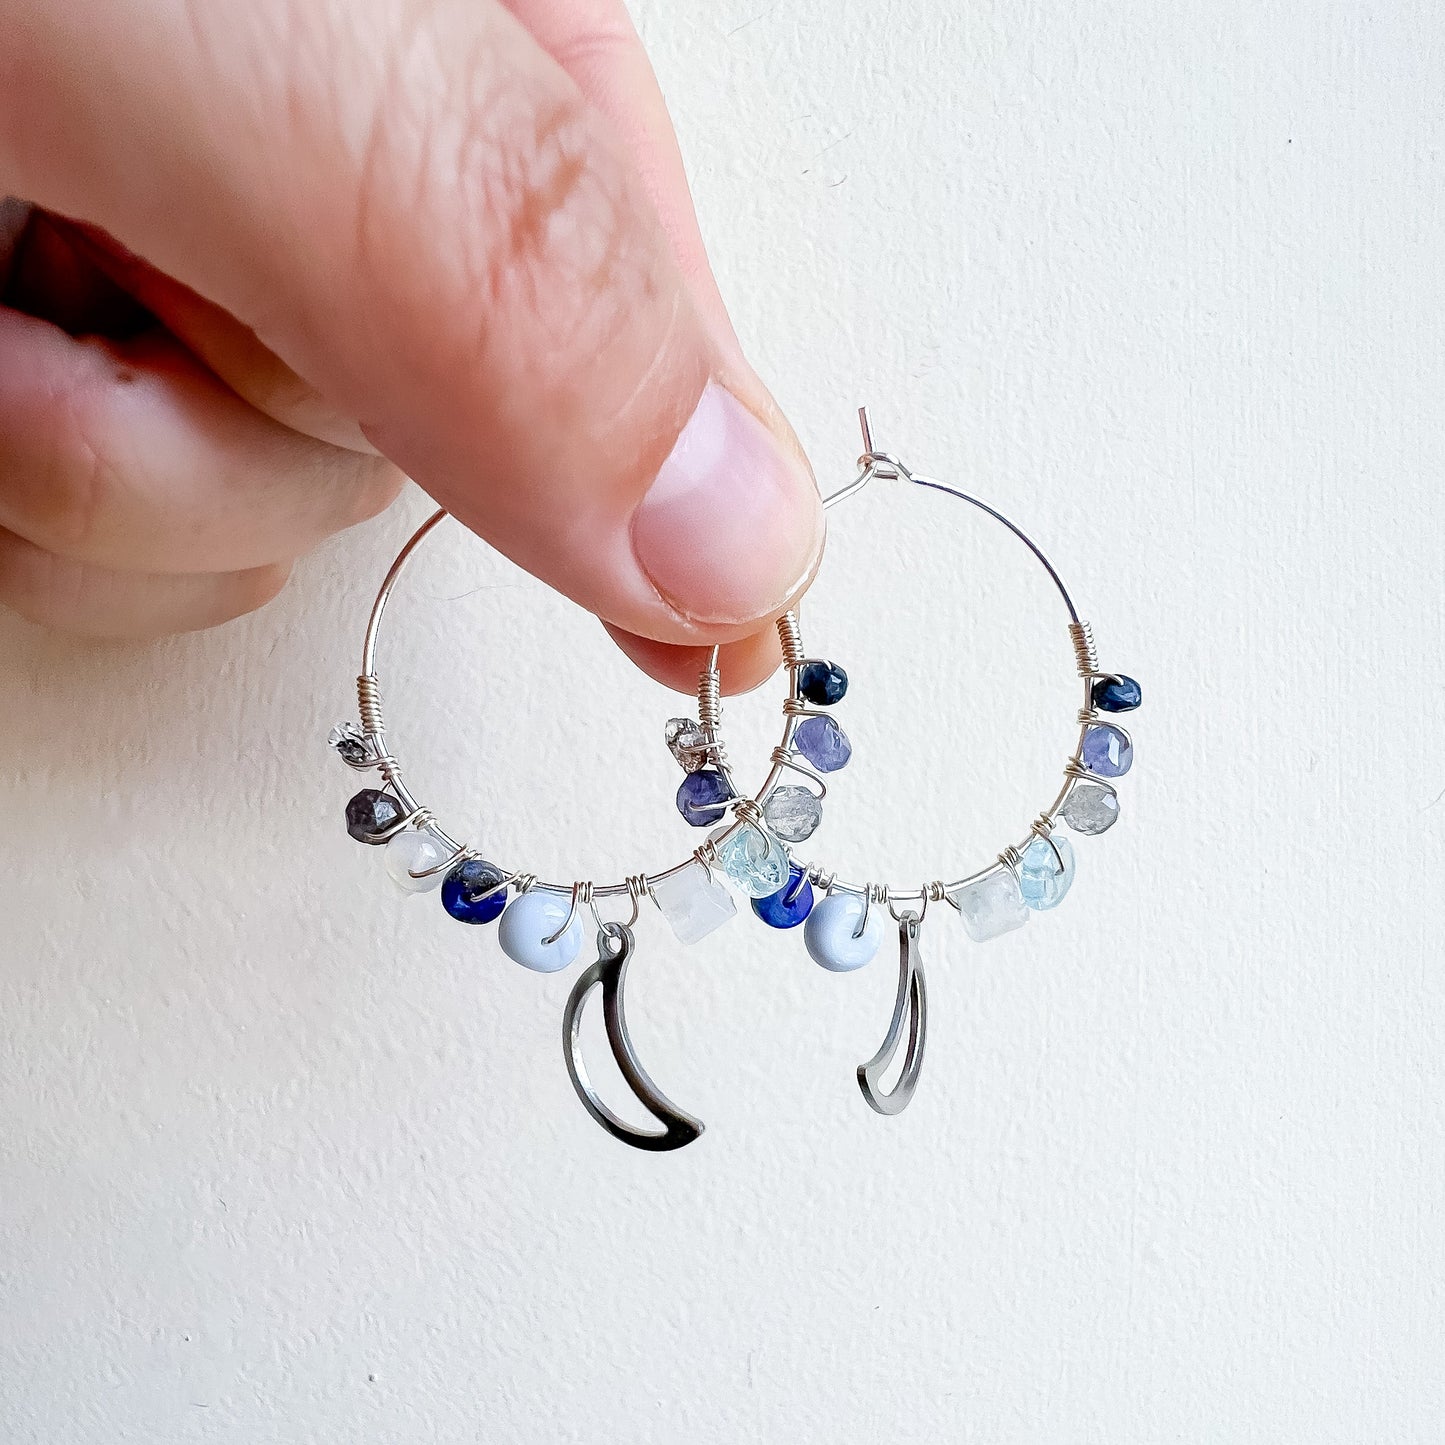 . PRE- ORDERS - Silver colour - “Once in a blue moon” earrings